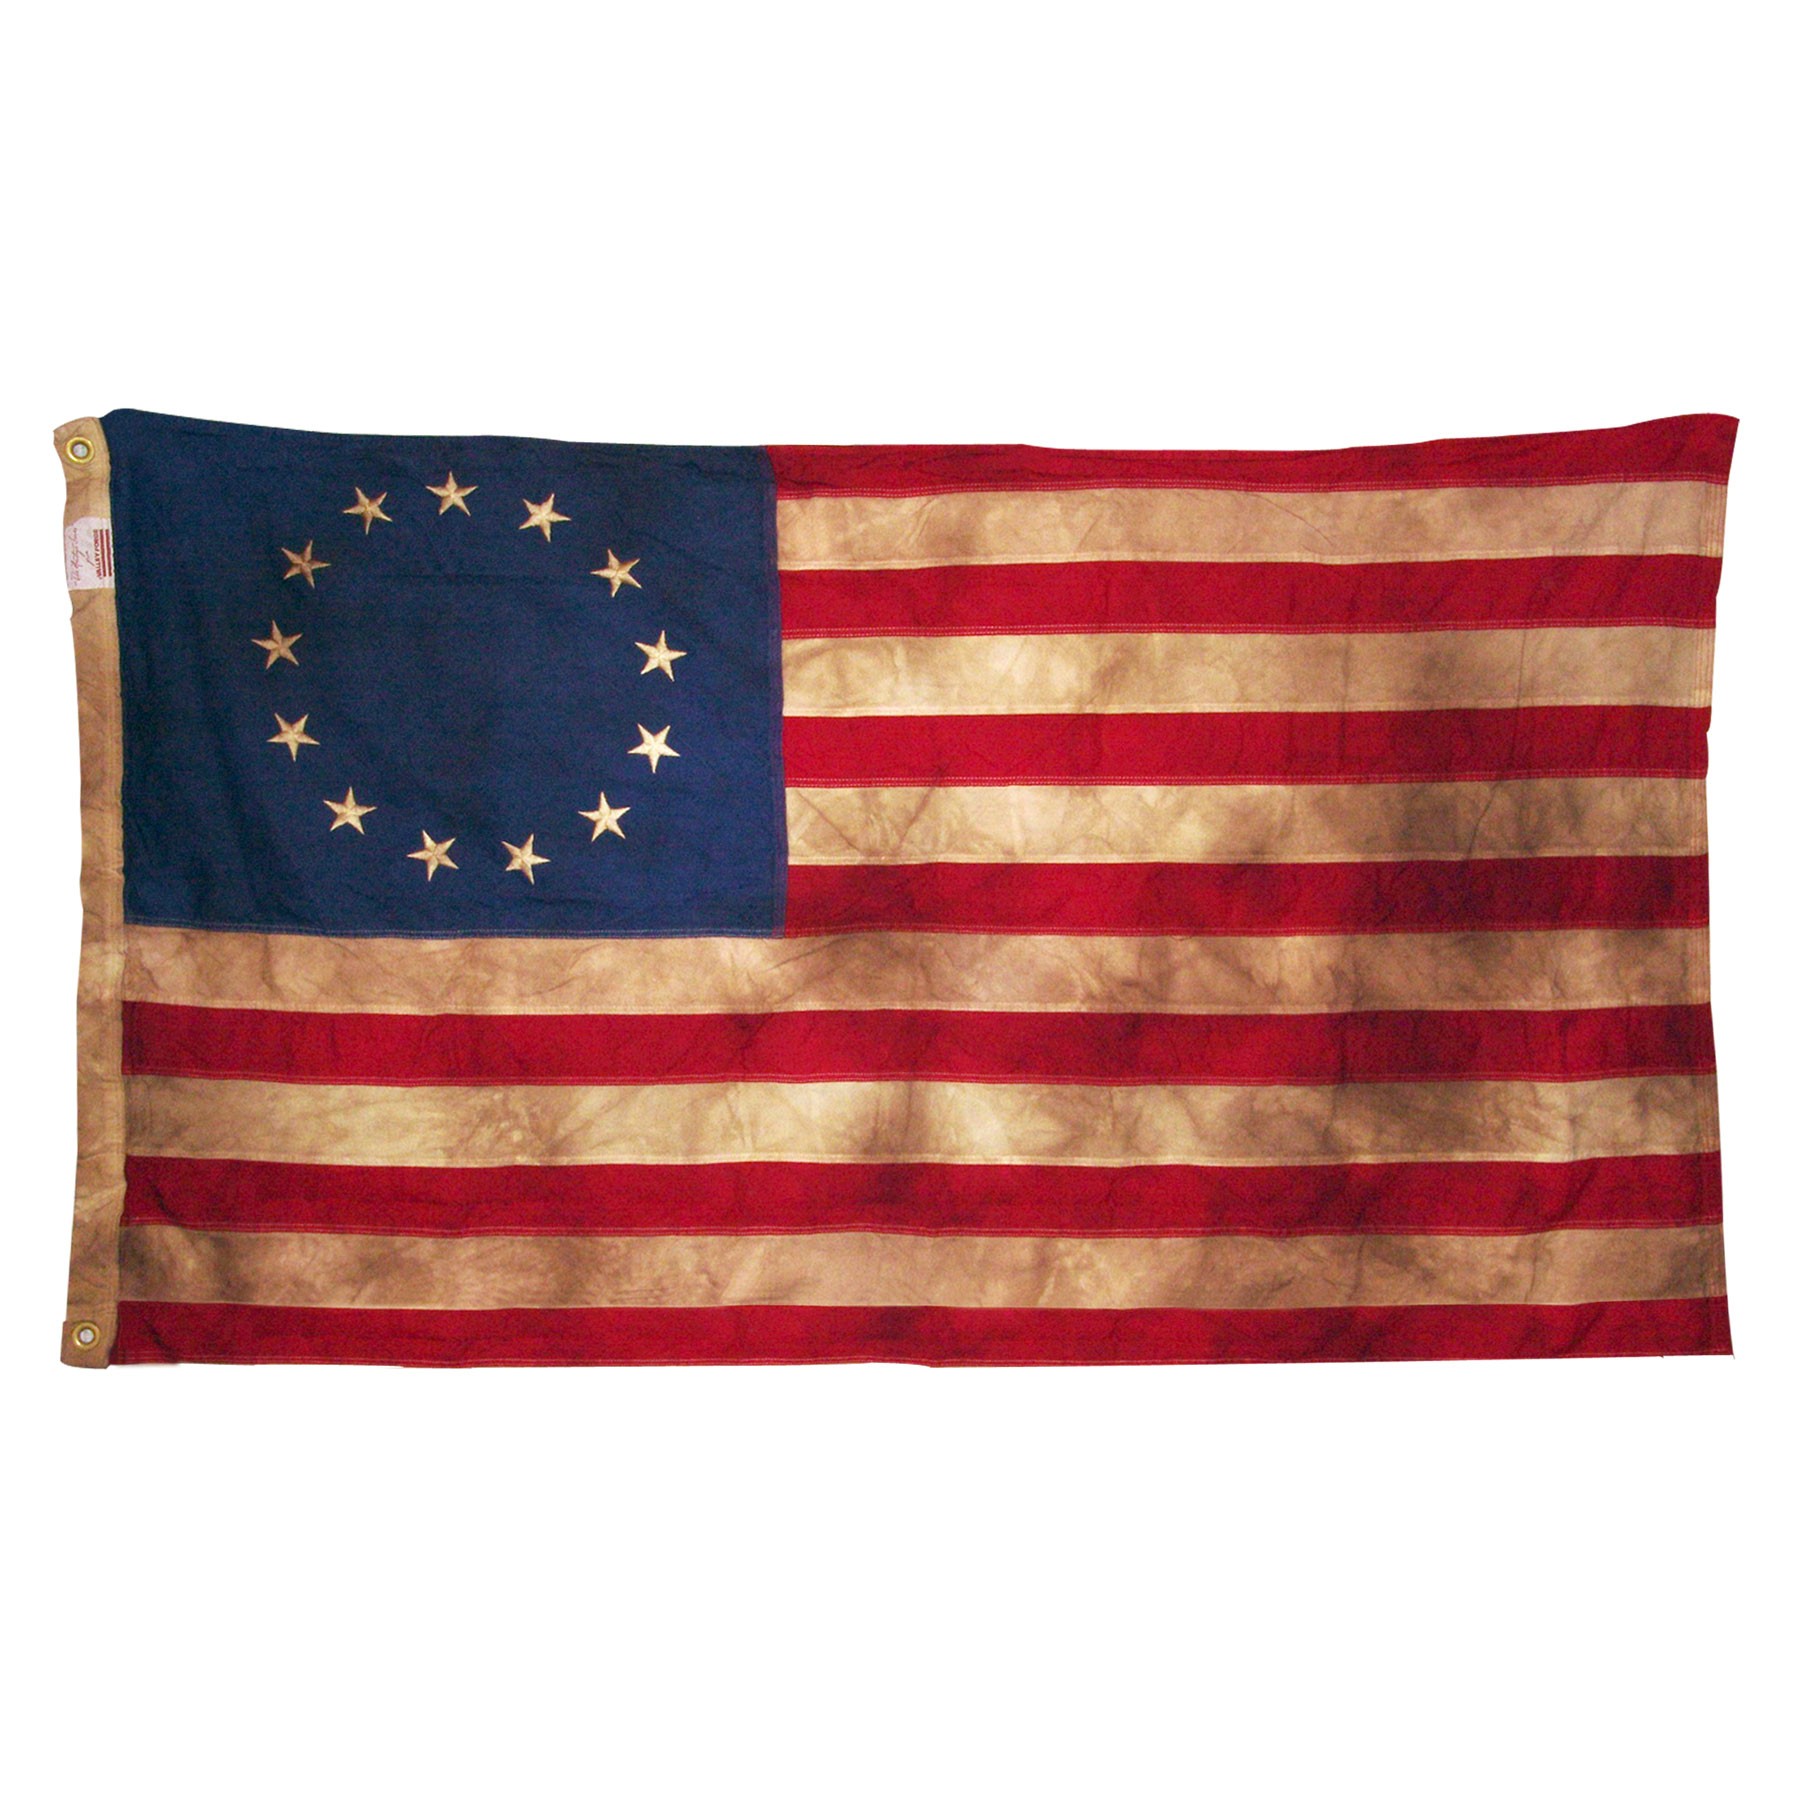 USA First Stars and Stripes Flag Heritage Series by Valley Forge